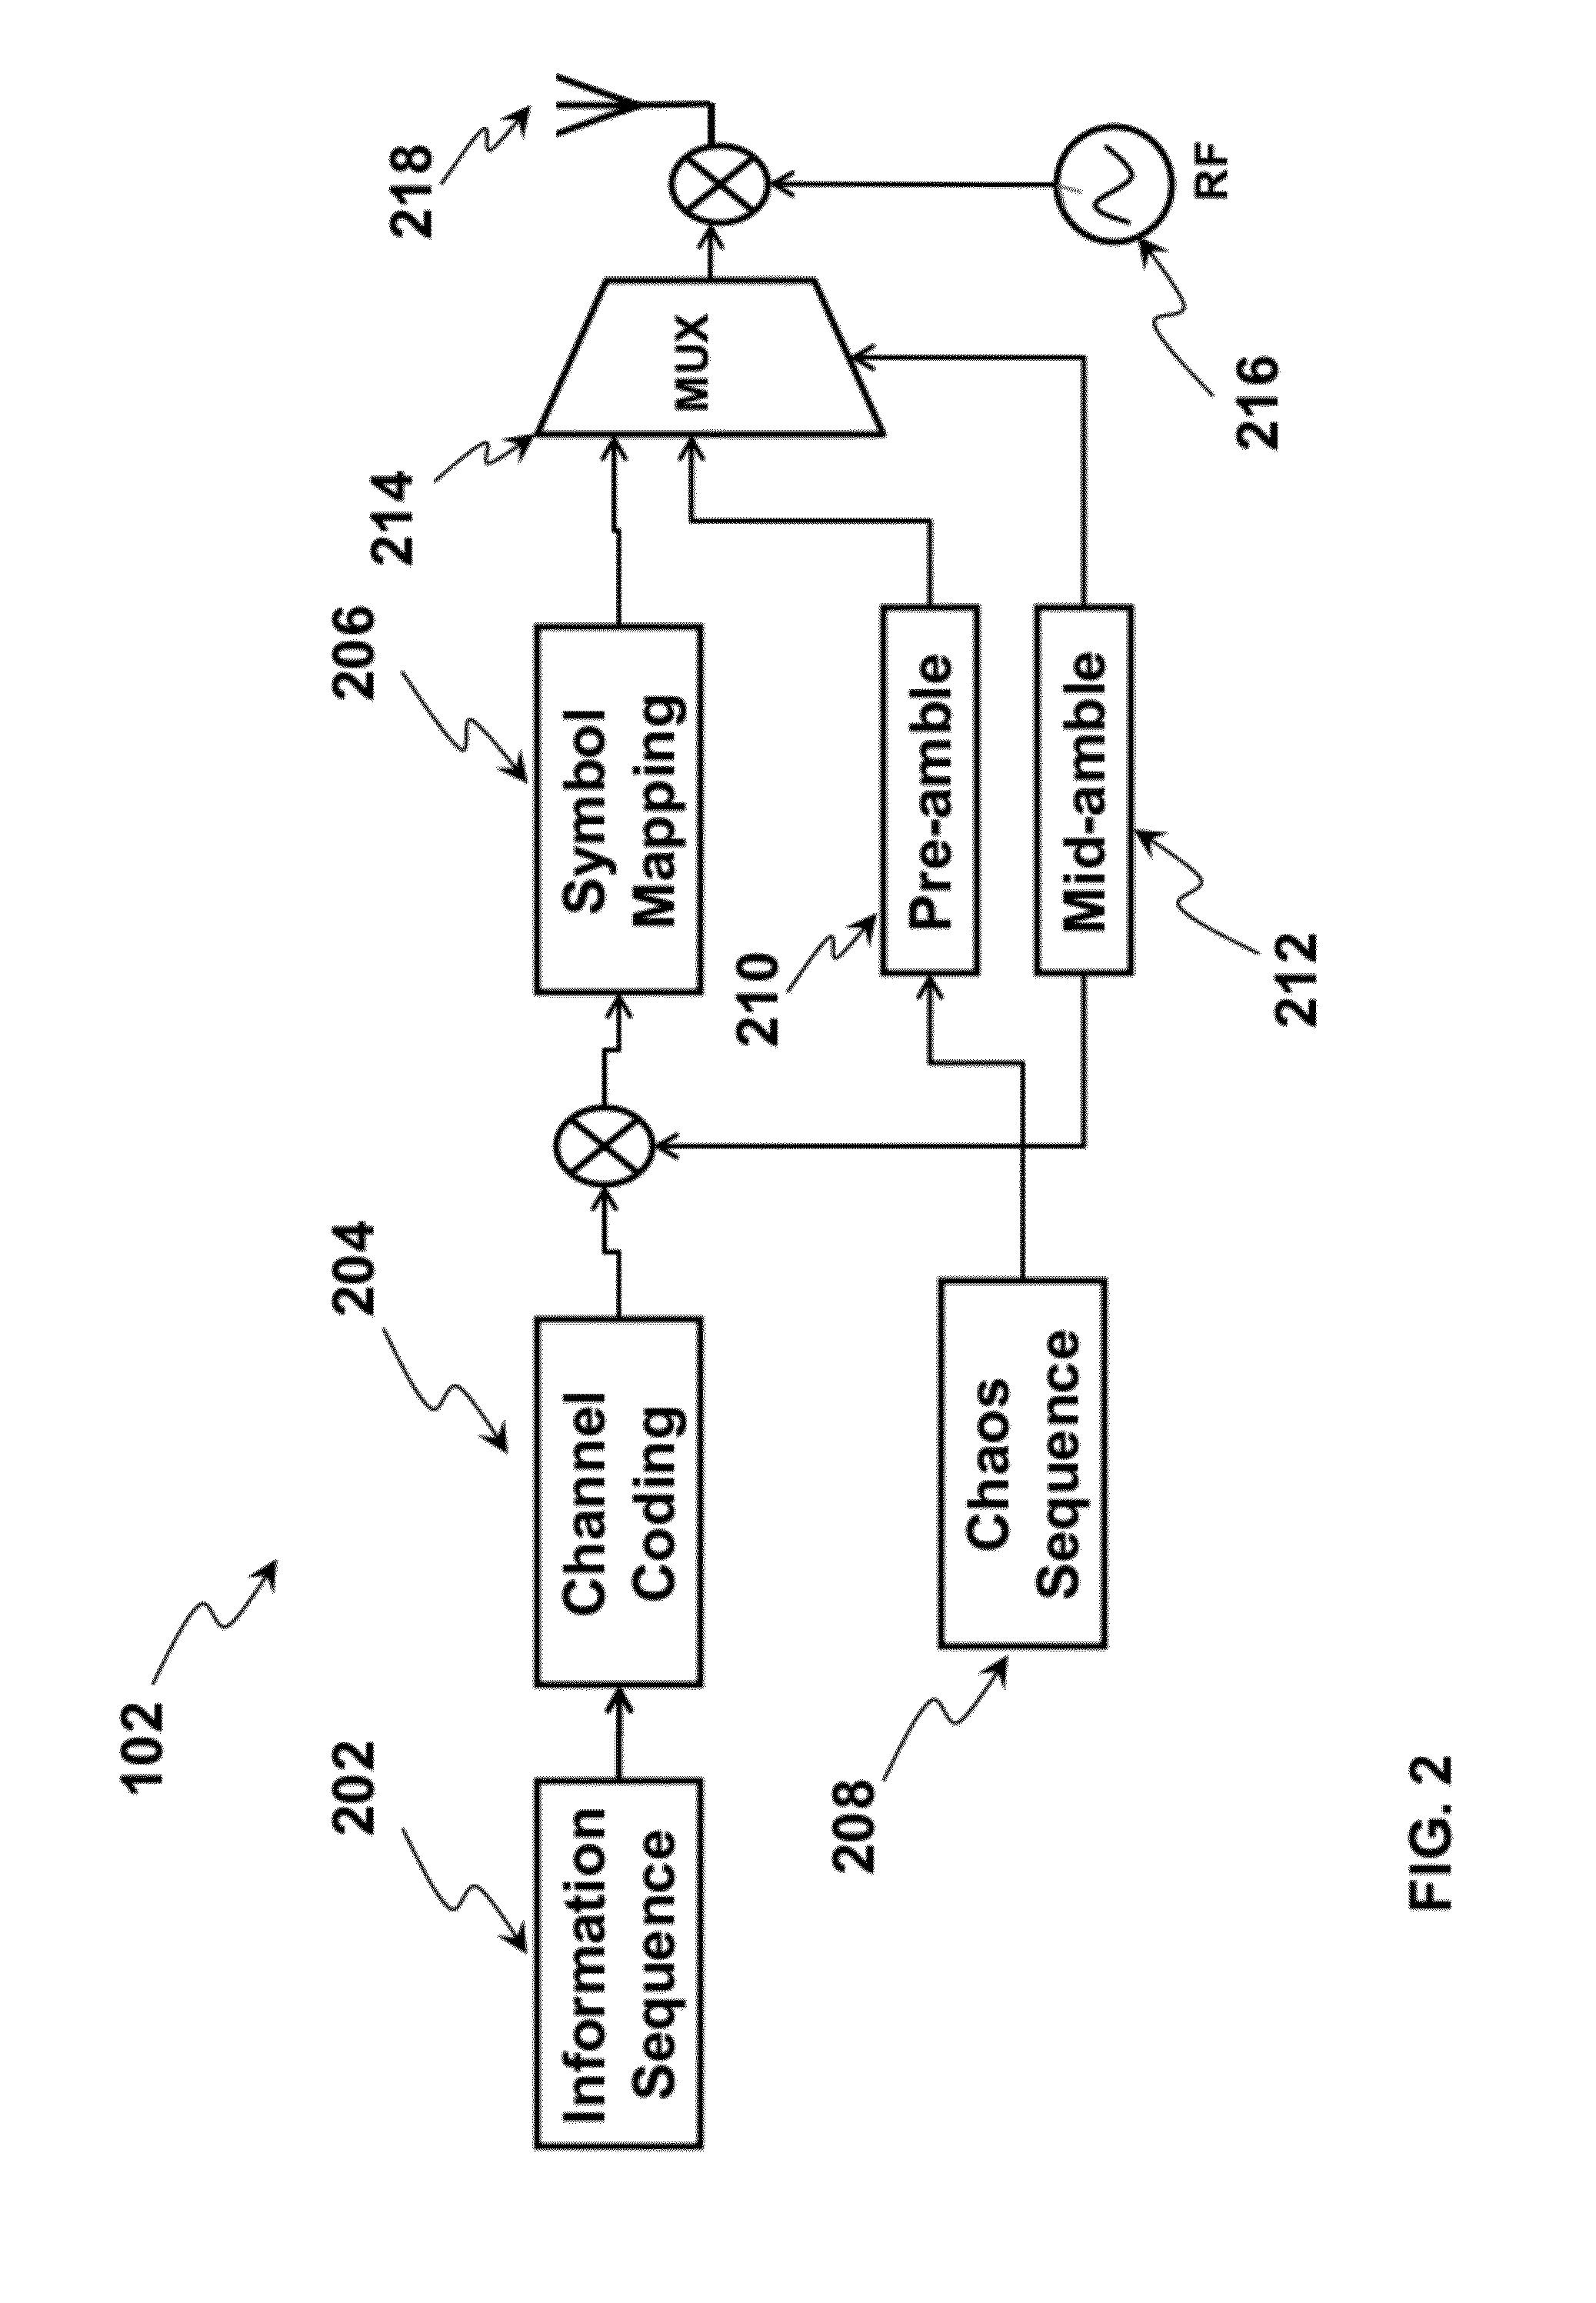 Method and Apparatus for Communicating Data in a Digital Chaos Communication System